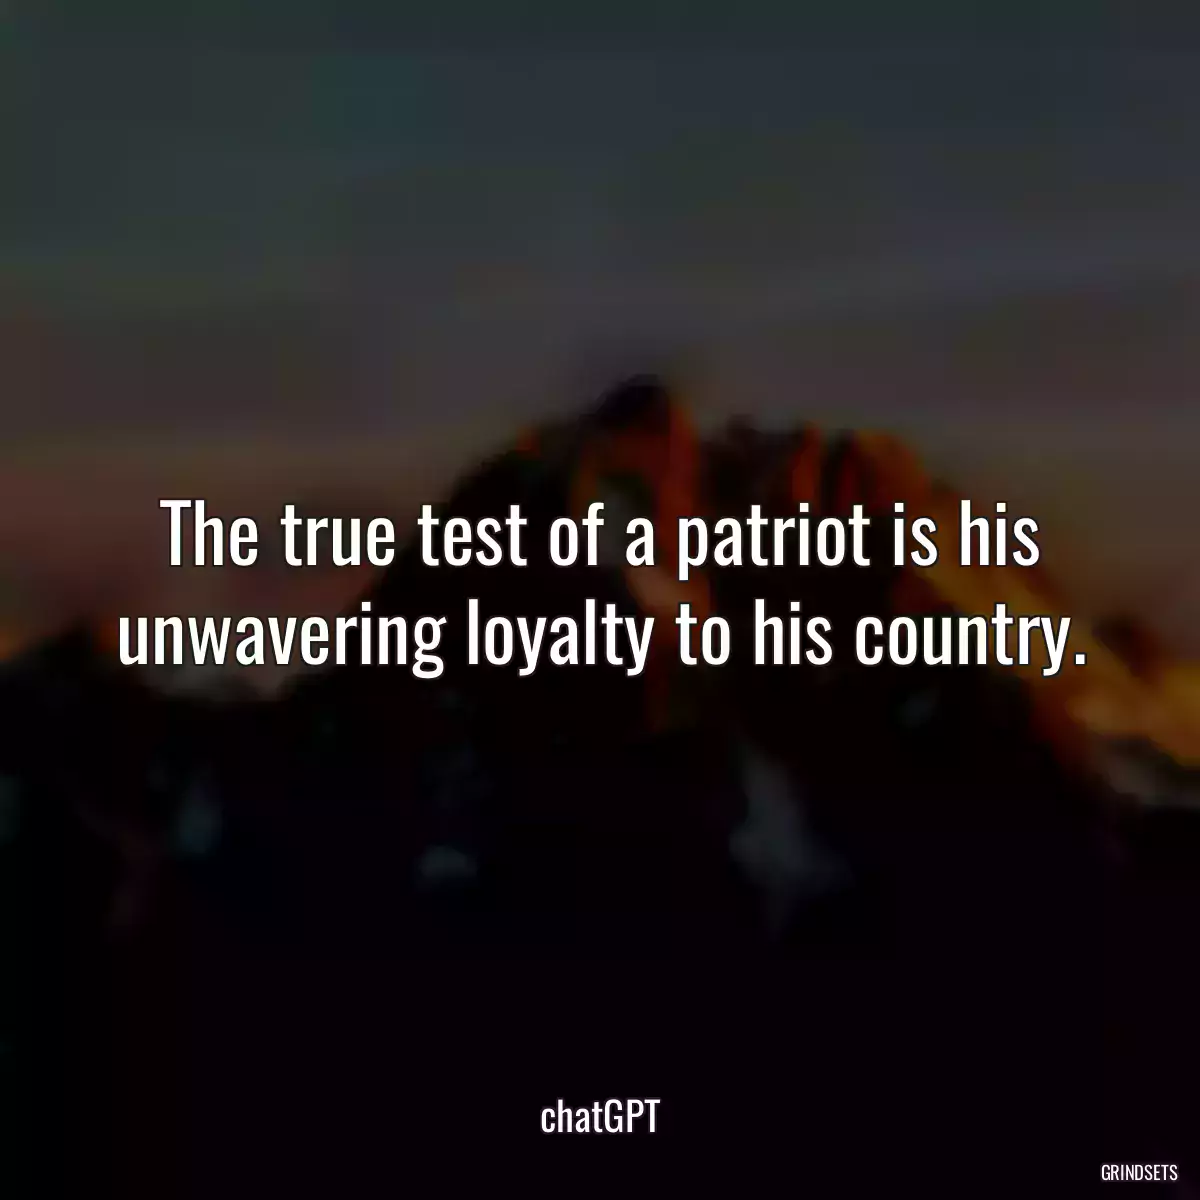 The true test of a patriot is his unwavering loyalty to his country.